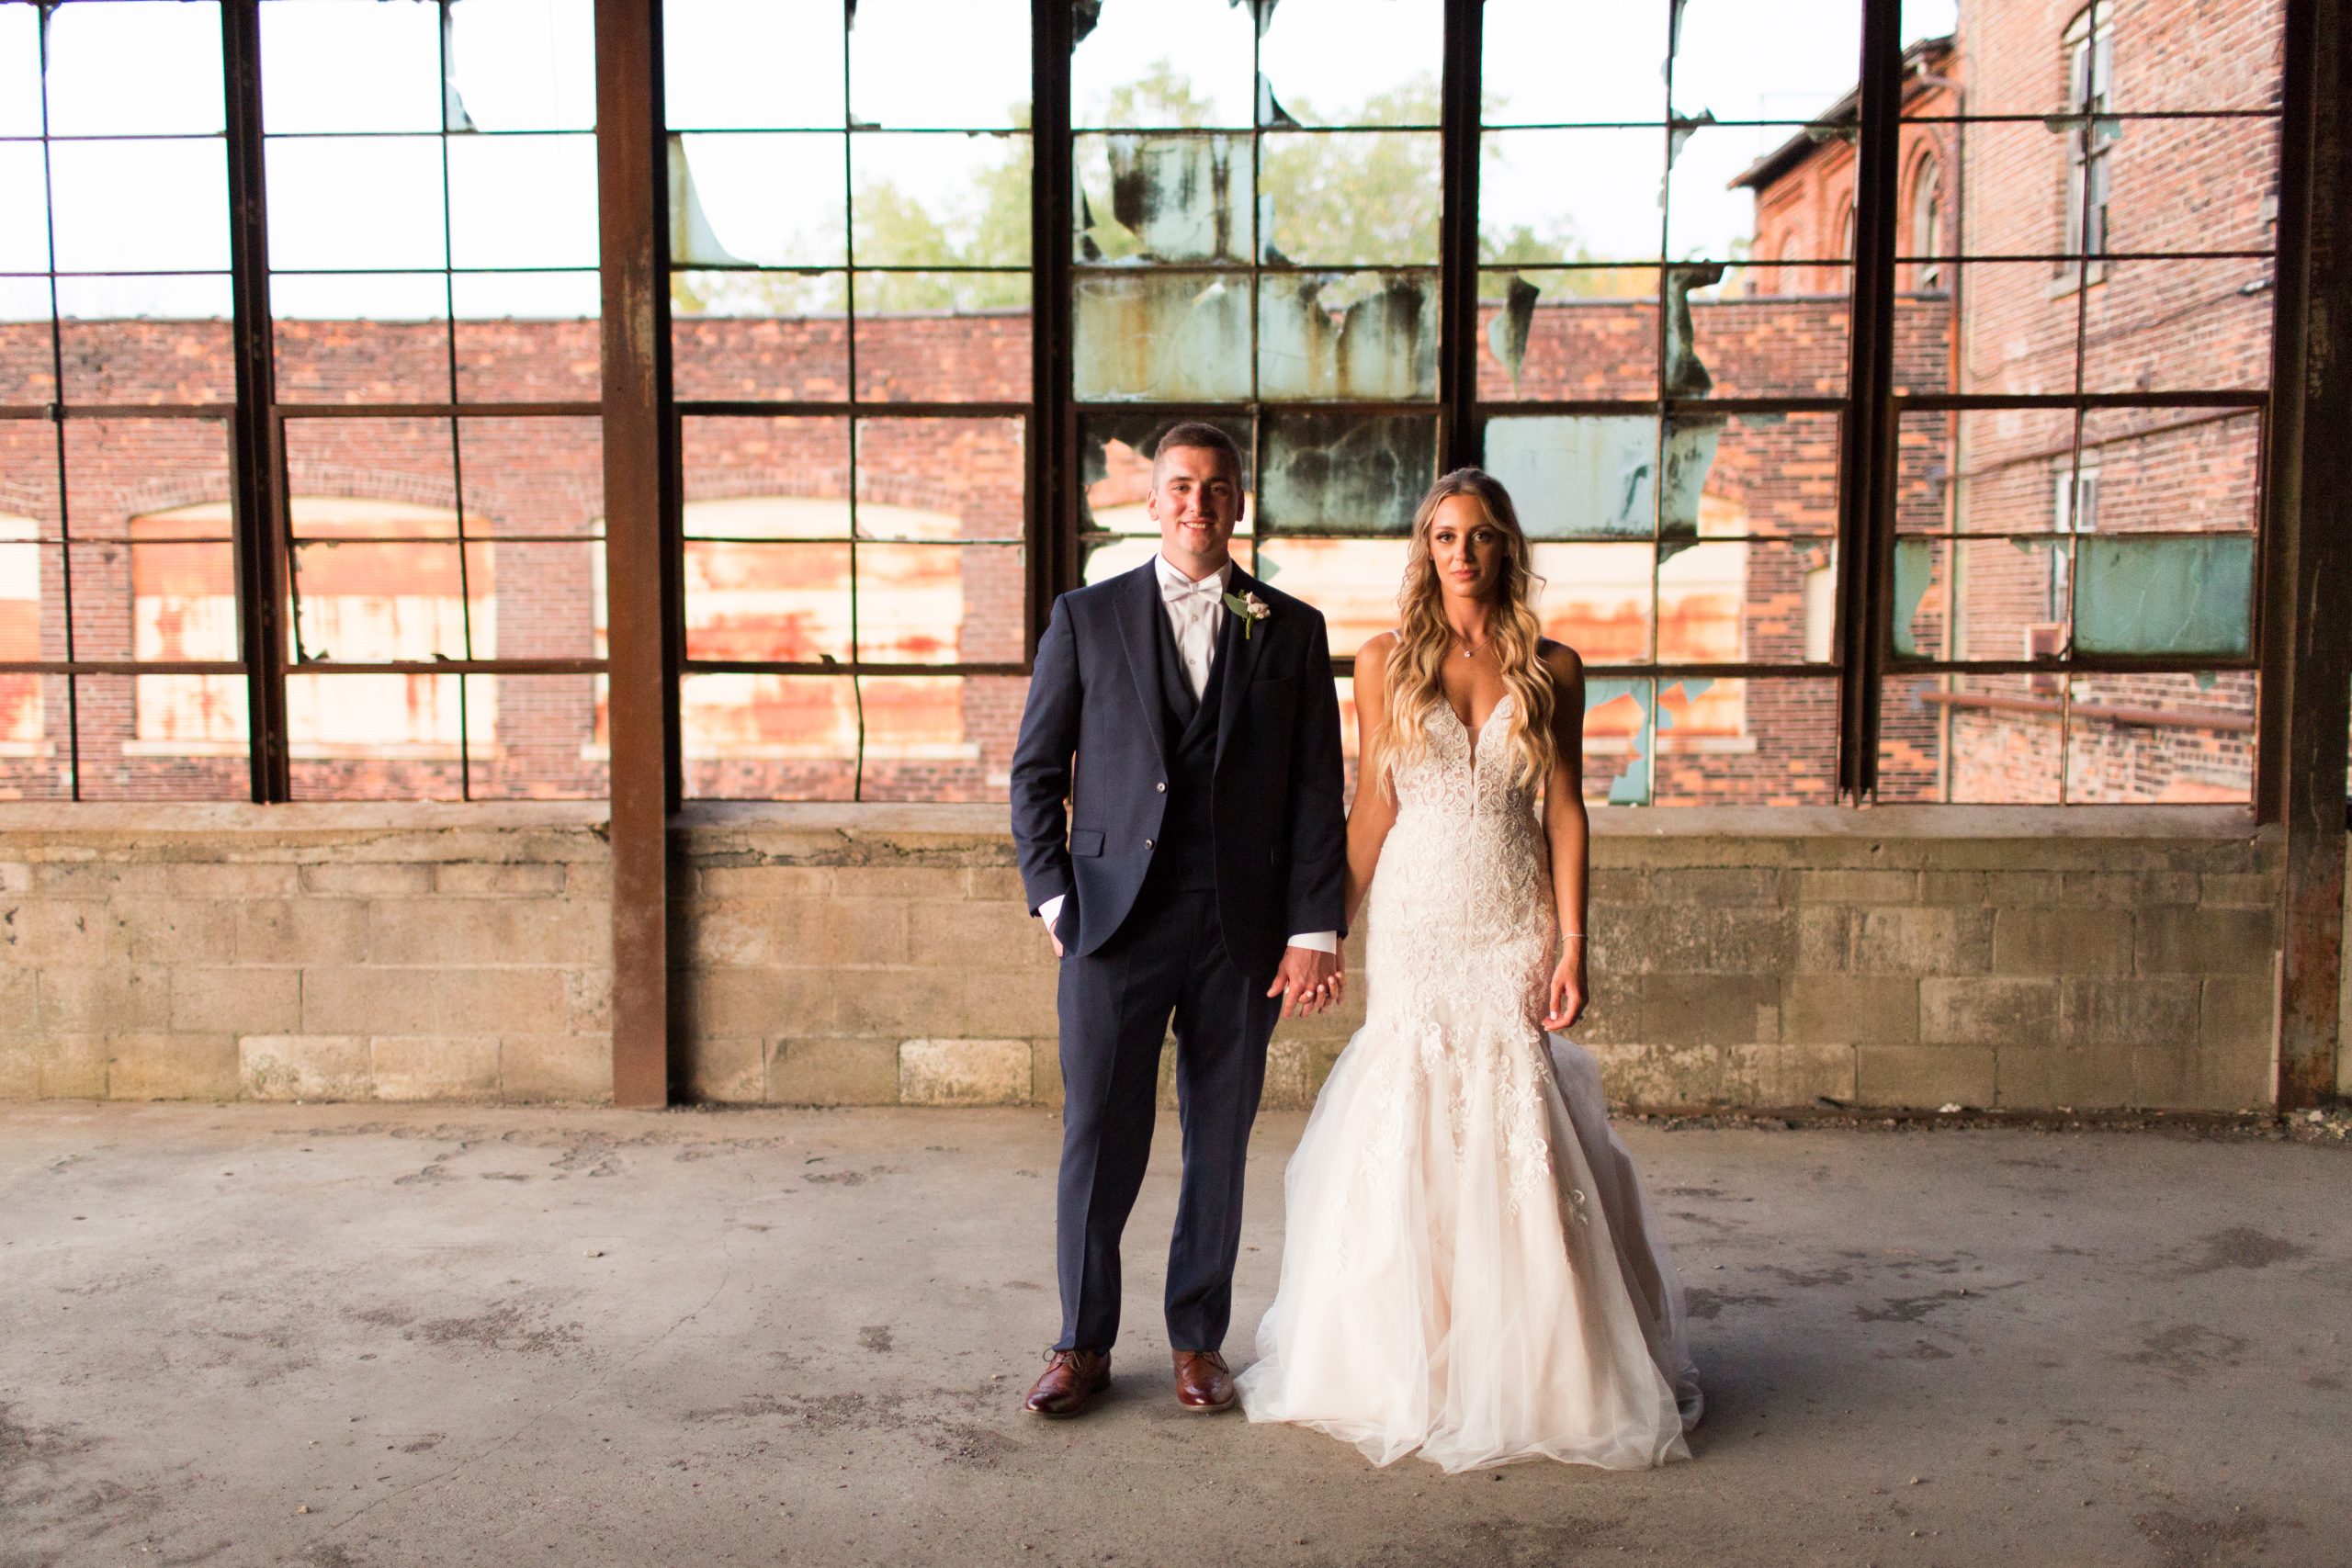 Macy and Ryan Terry posing in their wedding attire at The Venues event space in Downtown Toledo.